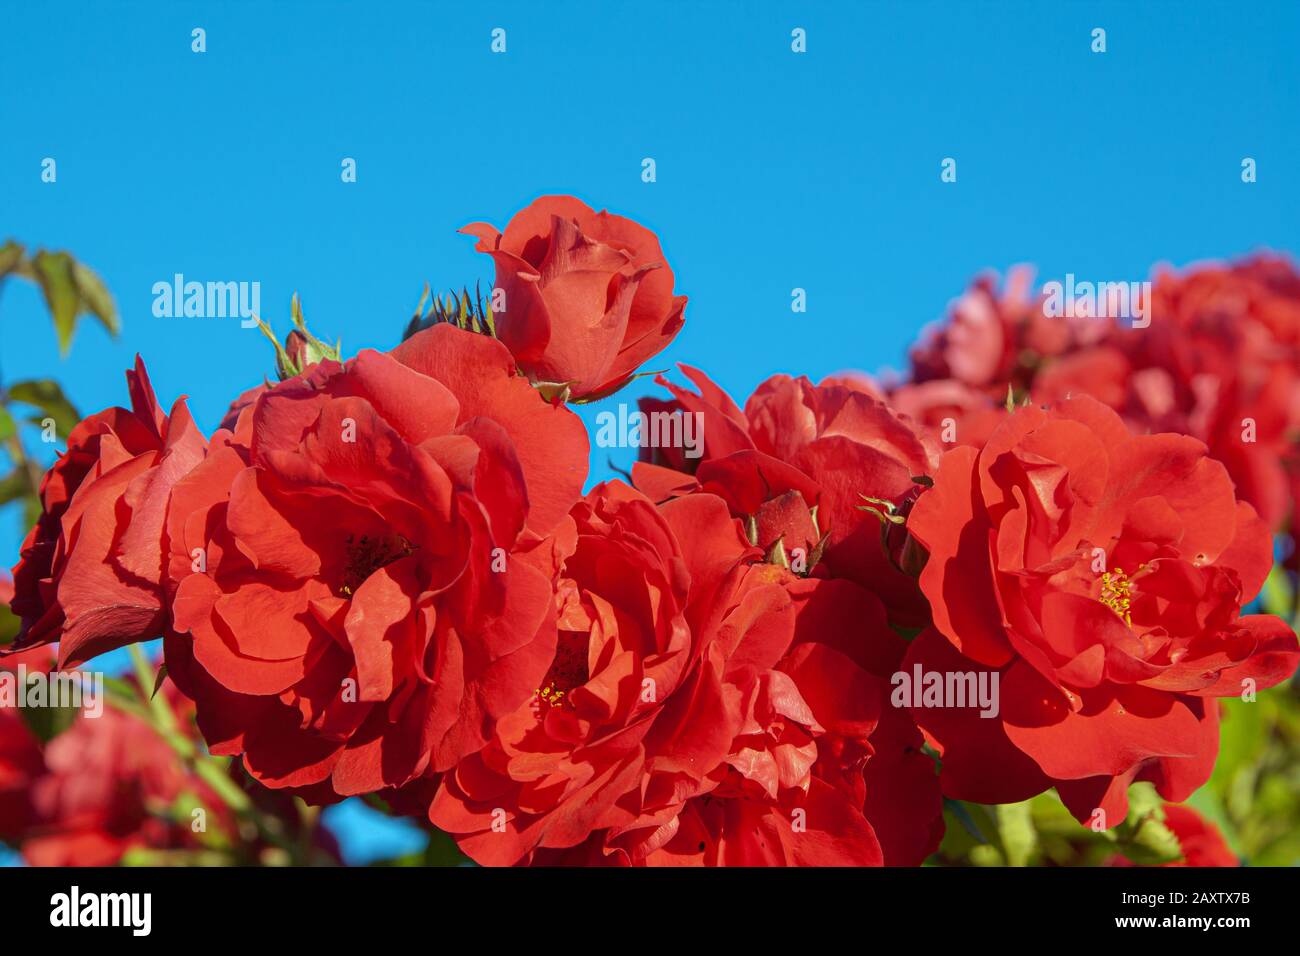 Large buds of scarlet roses against a blue sky Stock Photo